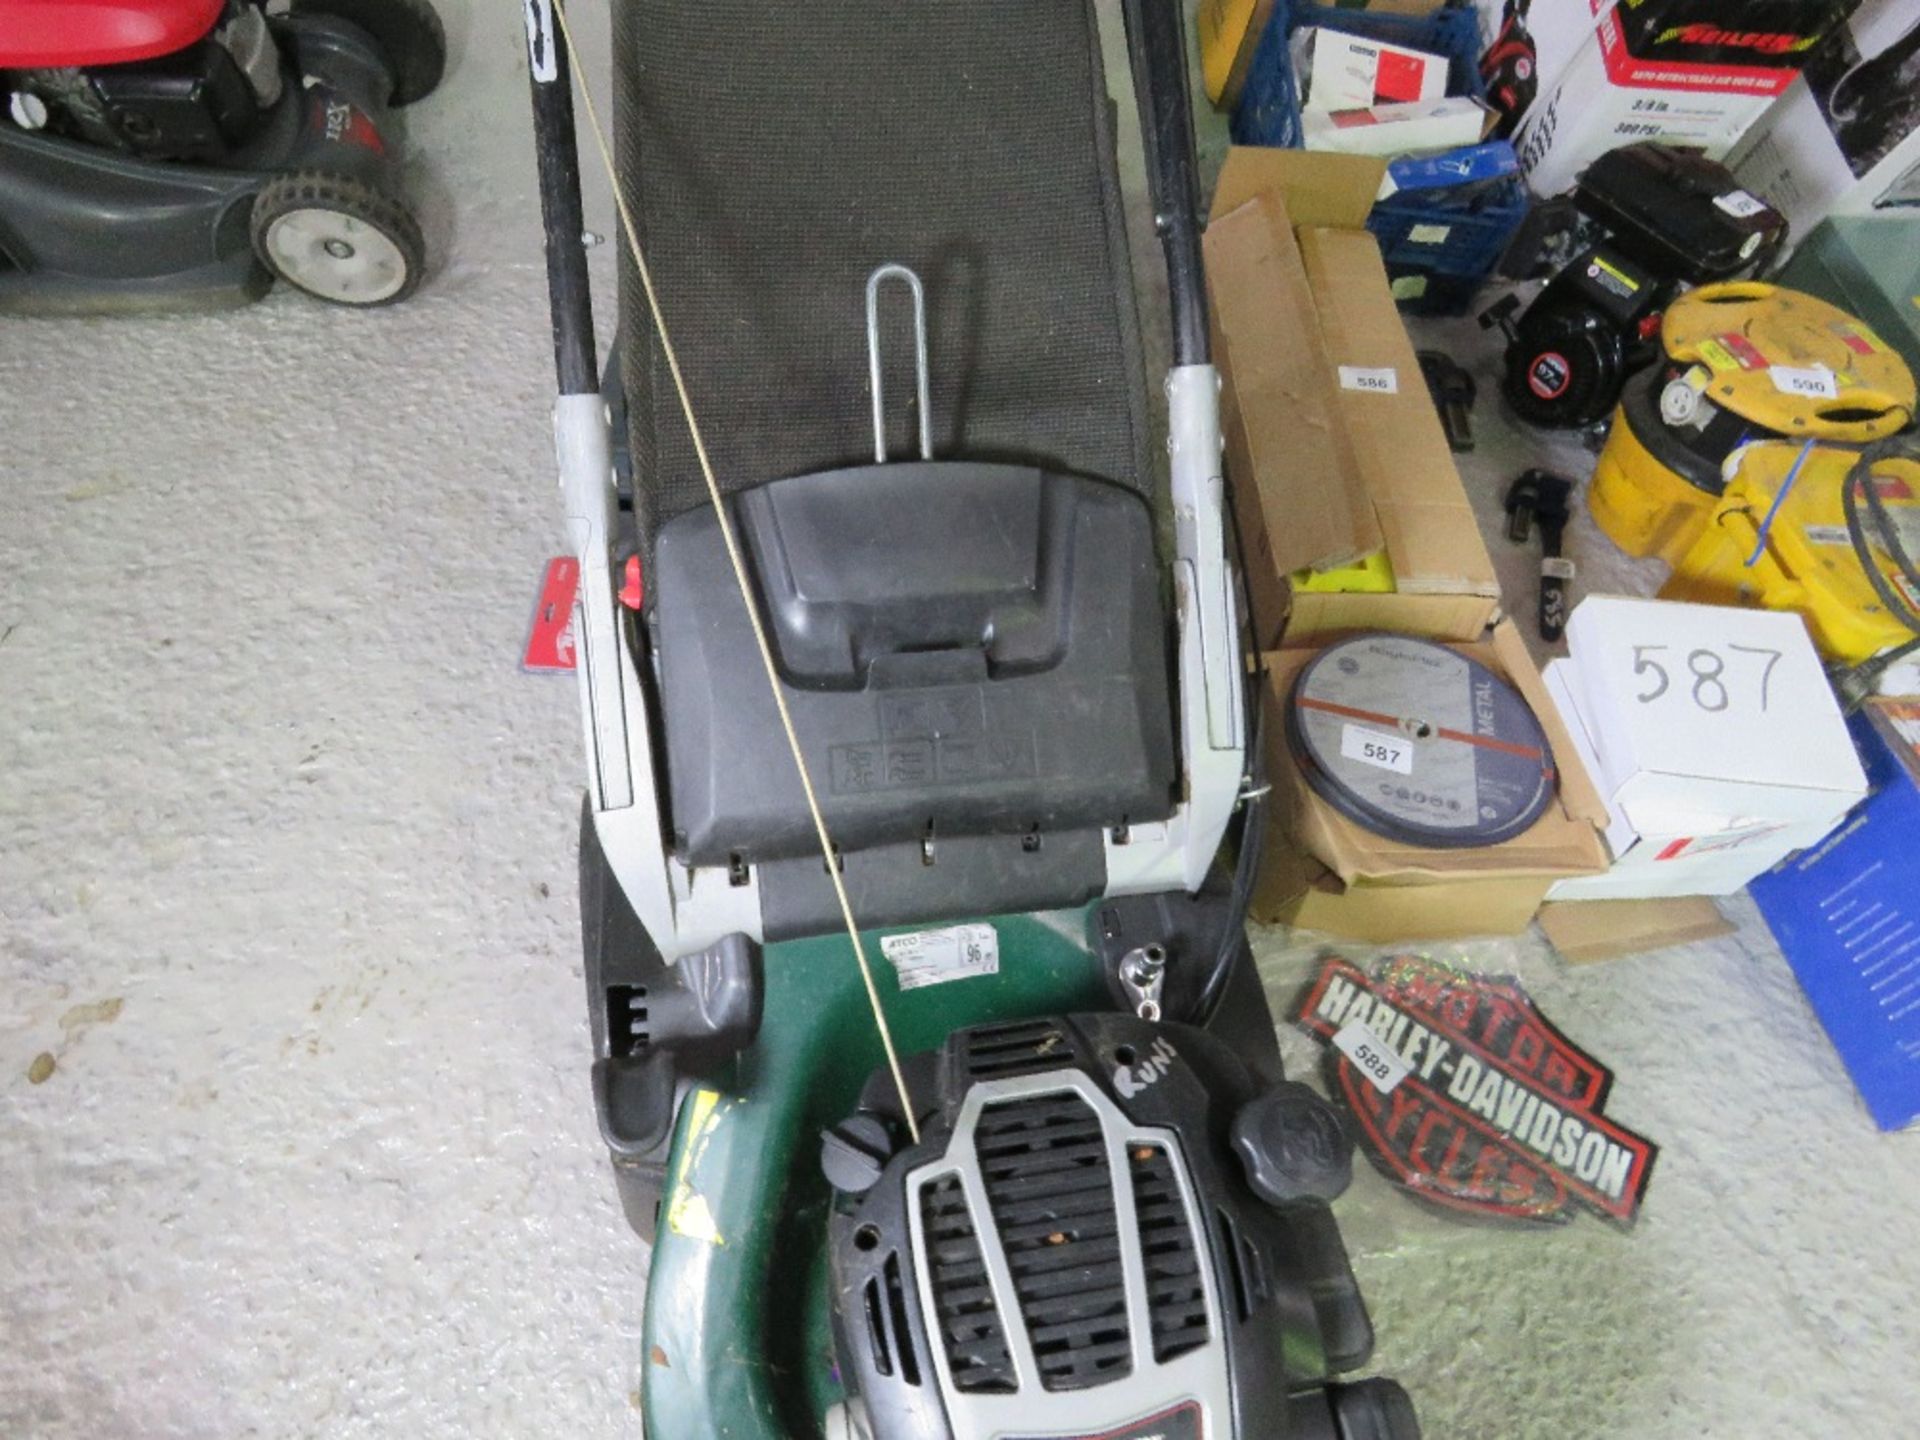 ATCO ROLLER MOWER WITH A COLLECTOR. WHEN TESTED WAS SEEN TO RUN. THIS LOT IS SOLD UNDER THE AUCTION - Image 3 of 5